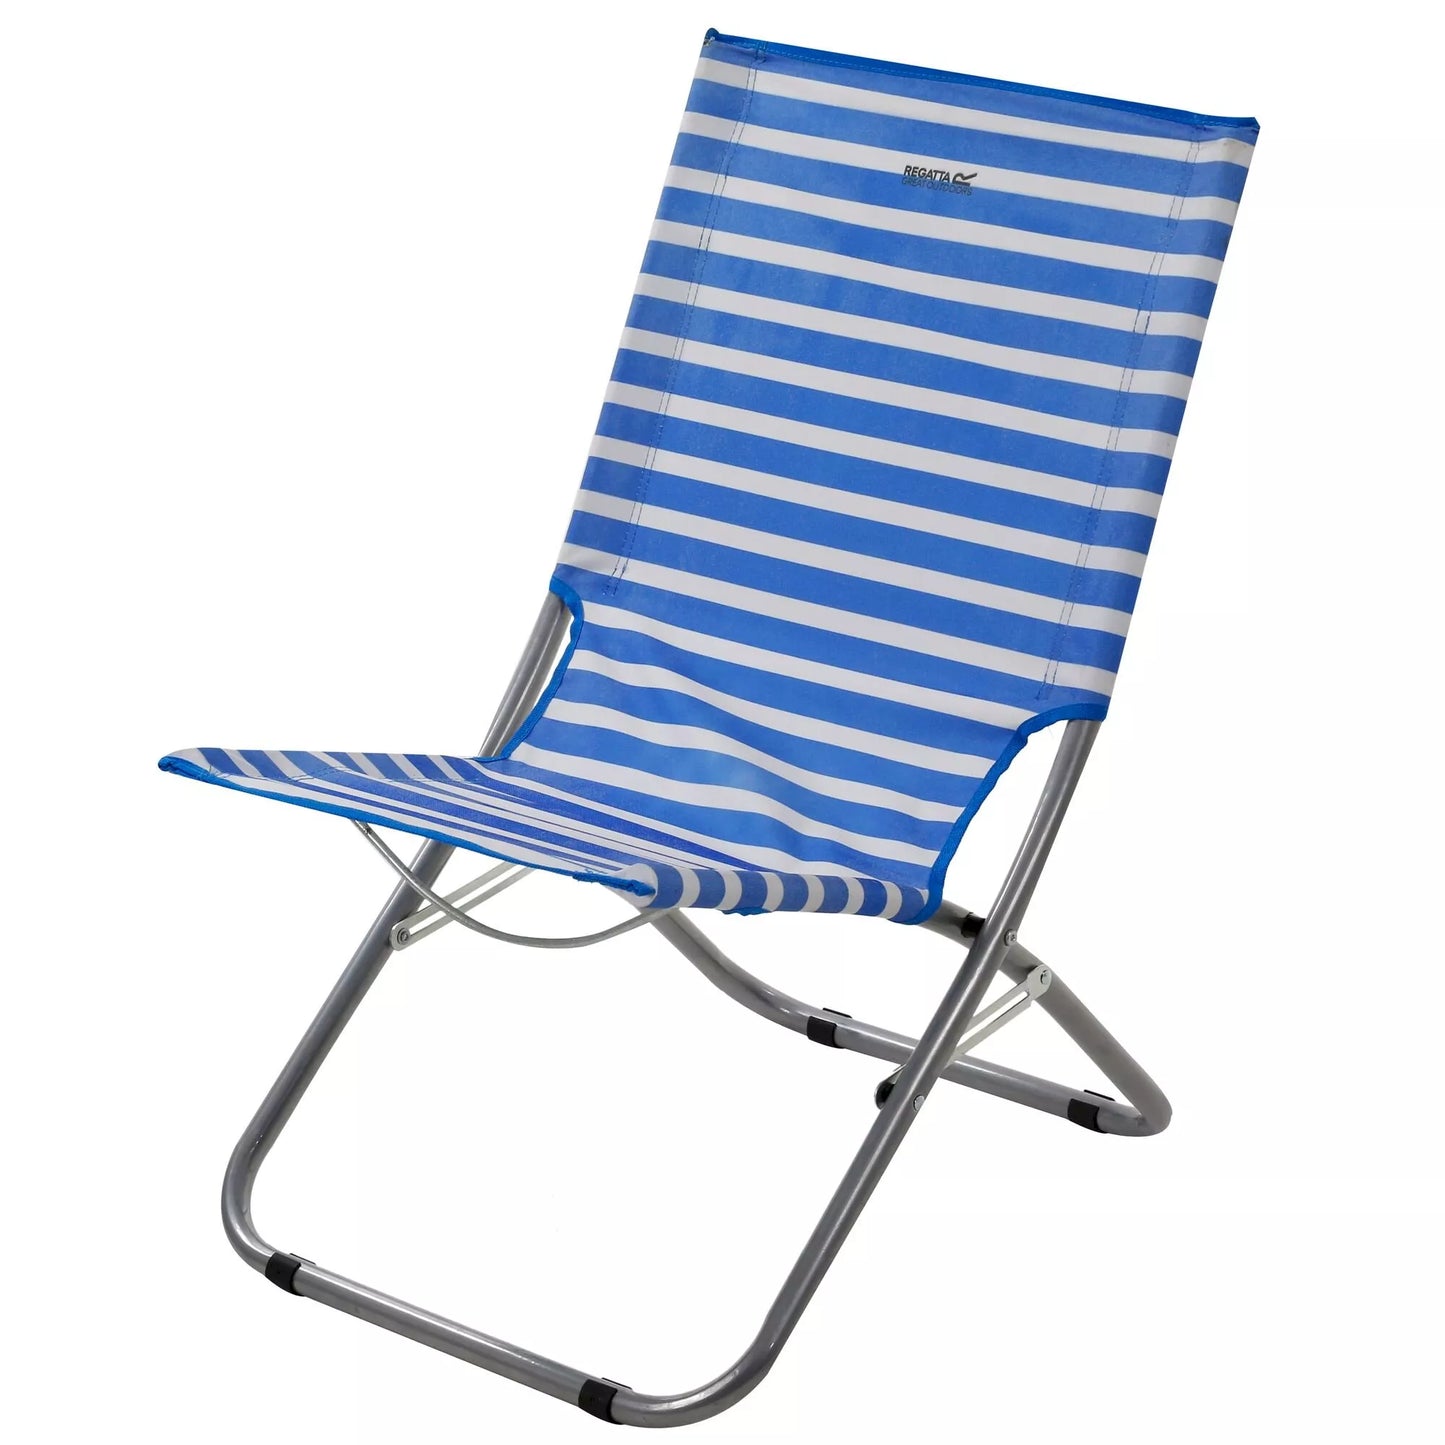 Regatta Kruza Beach Lounger - French Blue/White - Available in store only